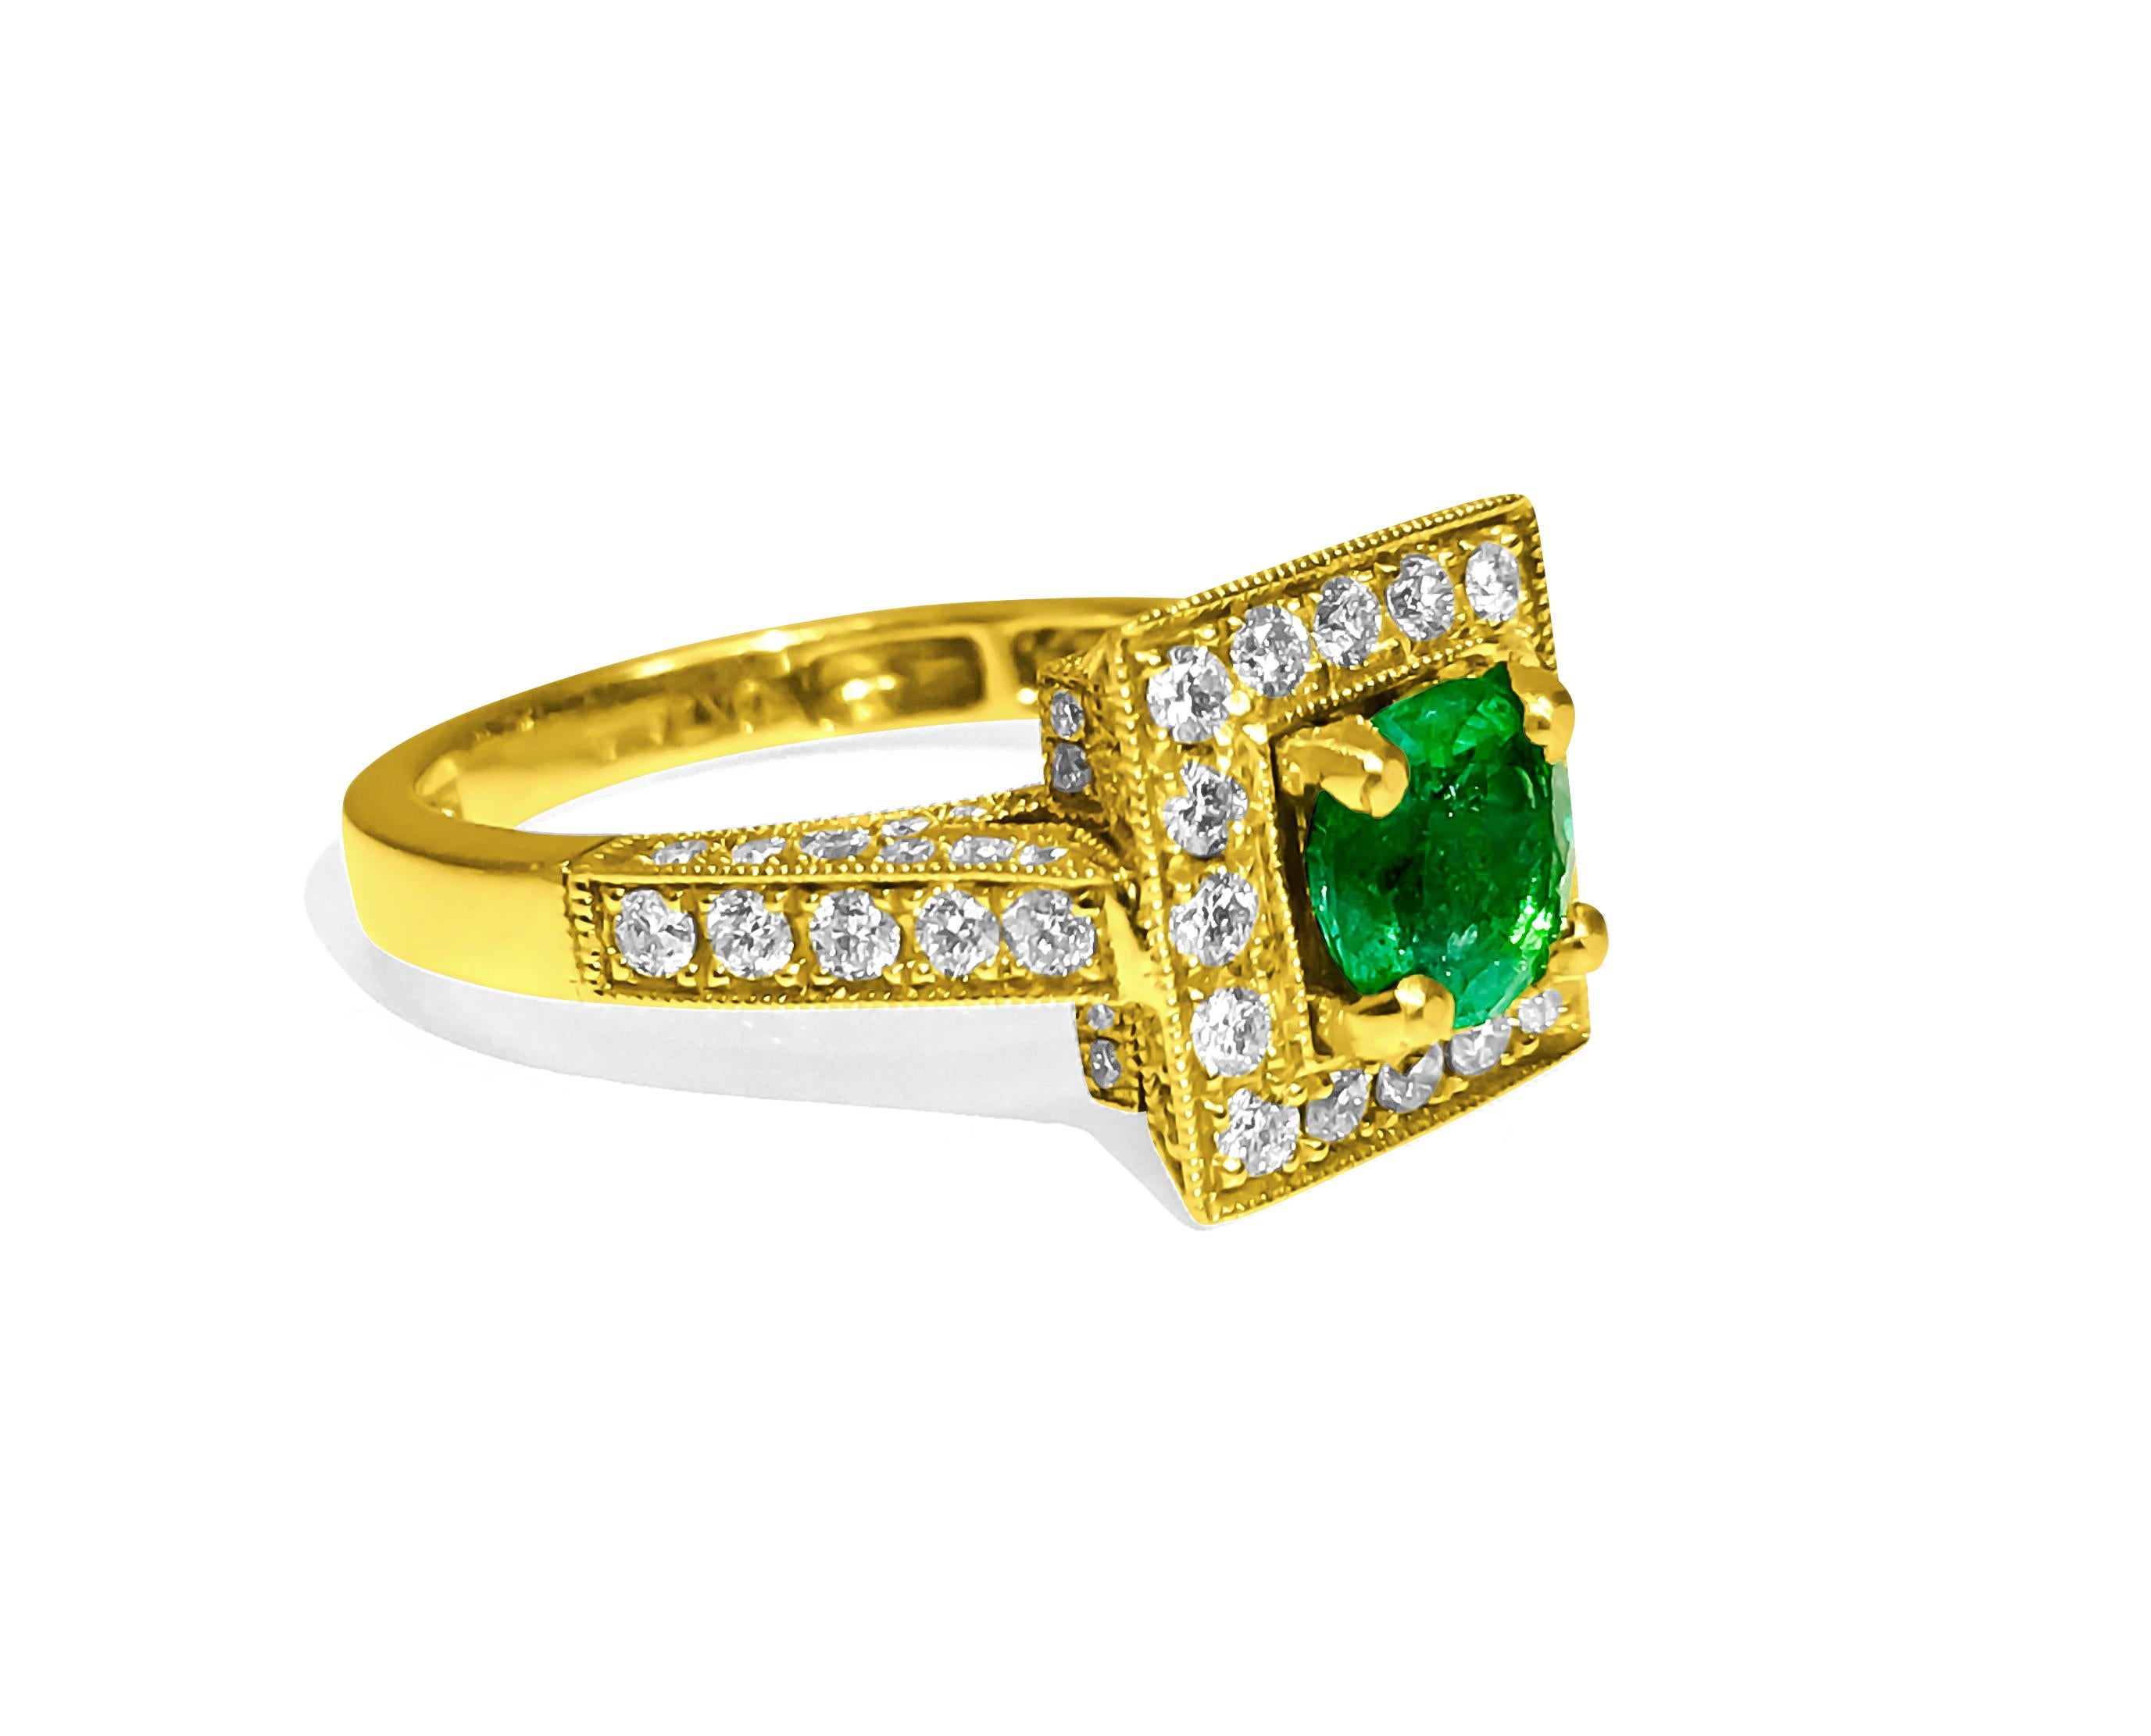 Metal: 18k yellow gold.
1.50 carat round emerald set in prongs. 100% natural earth mined emerald.

1.50 carat round brilliant cut diamonds. VS clarity and G color. 100% natural earth mined and genuine diamonds. 

Total carat weight of all precious